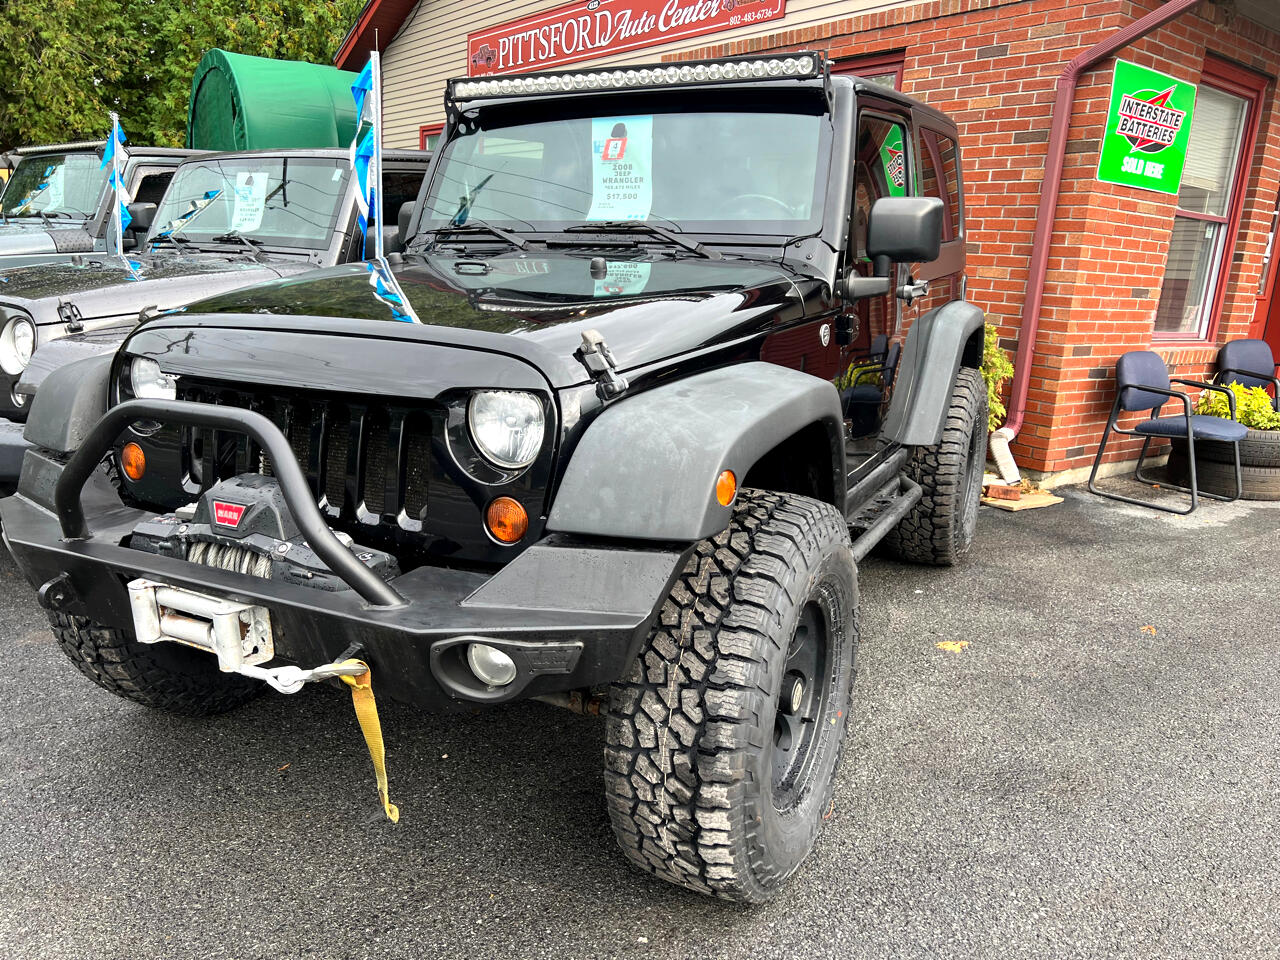 Used 2008 Jeep Wrangler Rubicon for Sale in Pittsford VT 05763 Pittsford  Automotive Center